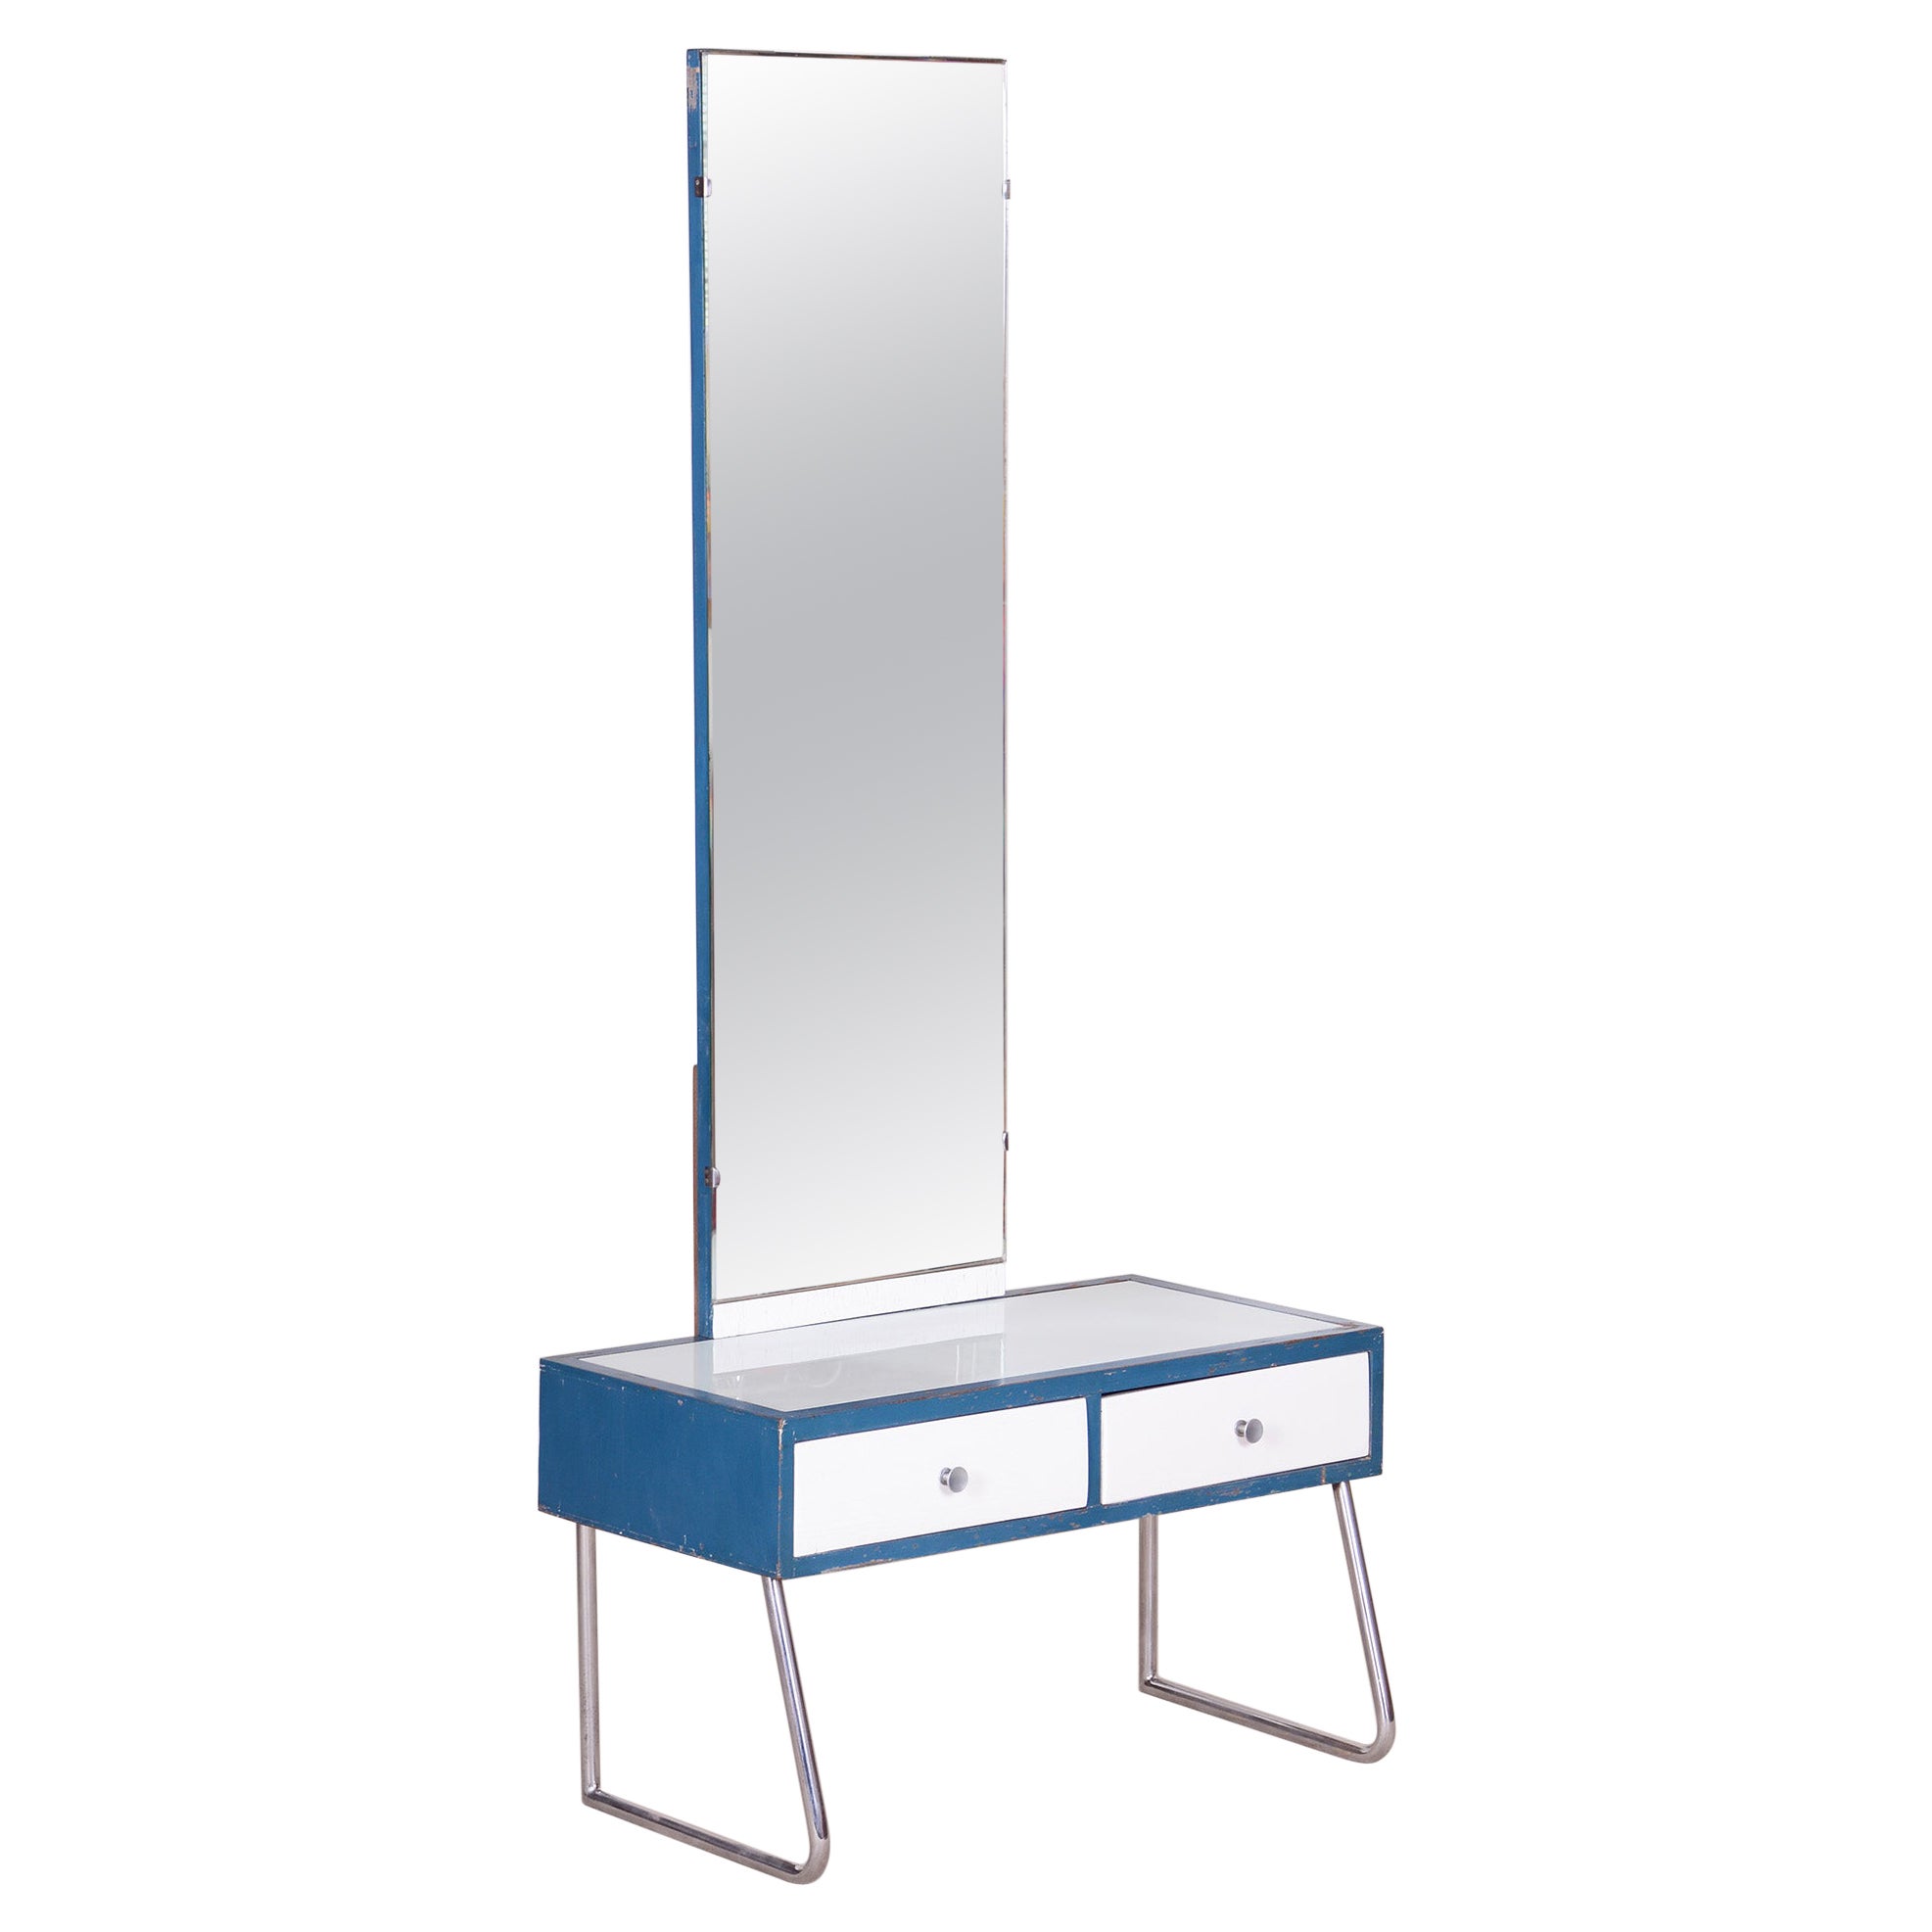 Blue and White Chrome Bauhaus Dressing Mirror, Made in 1930s, Czechia, Vichr For Sale